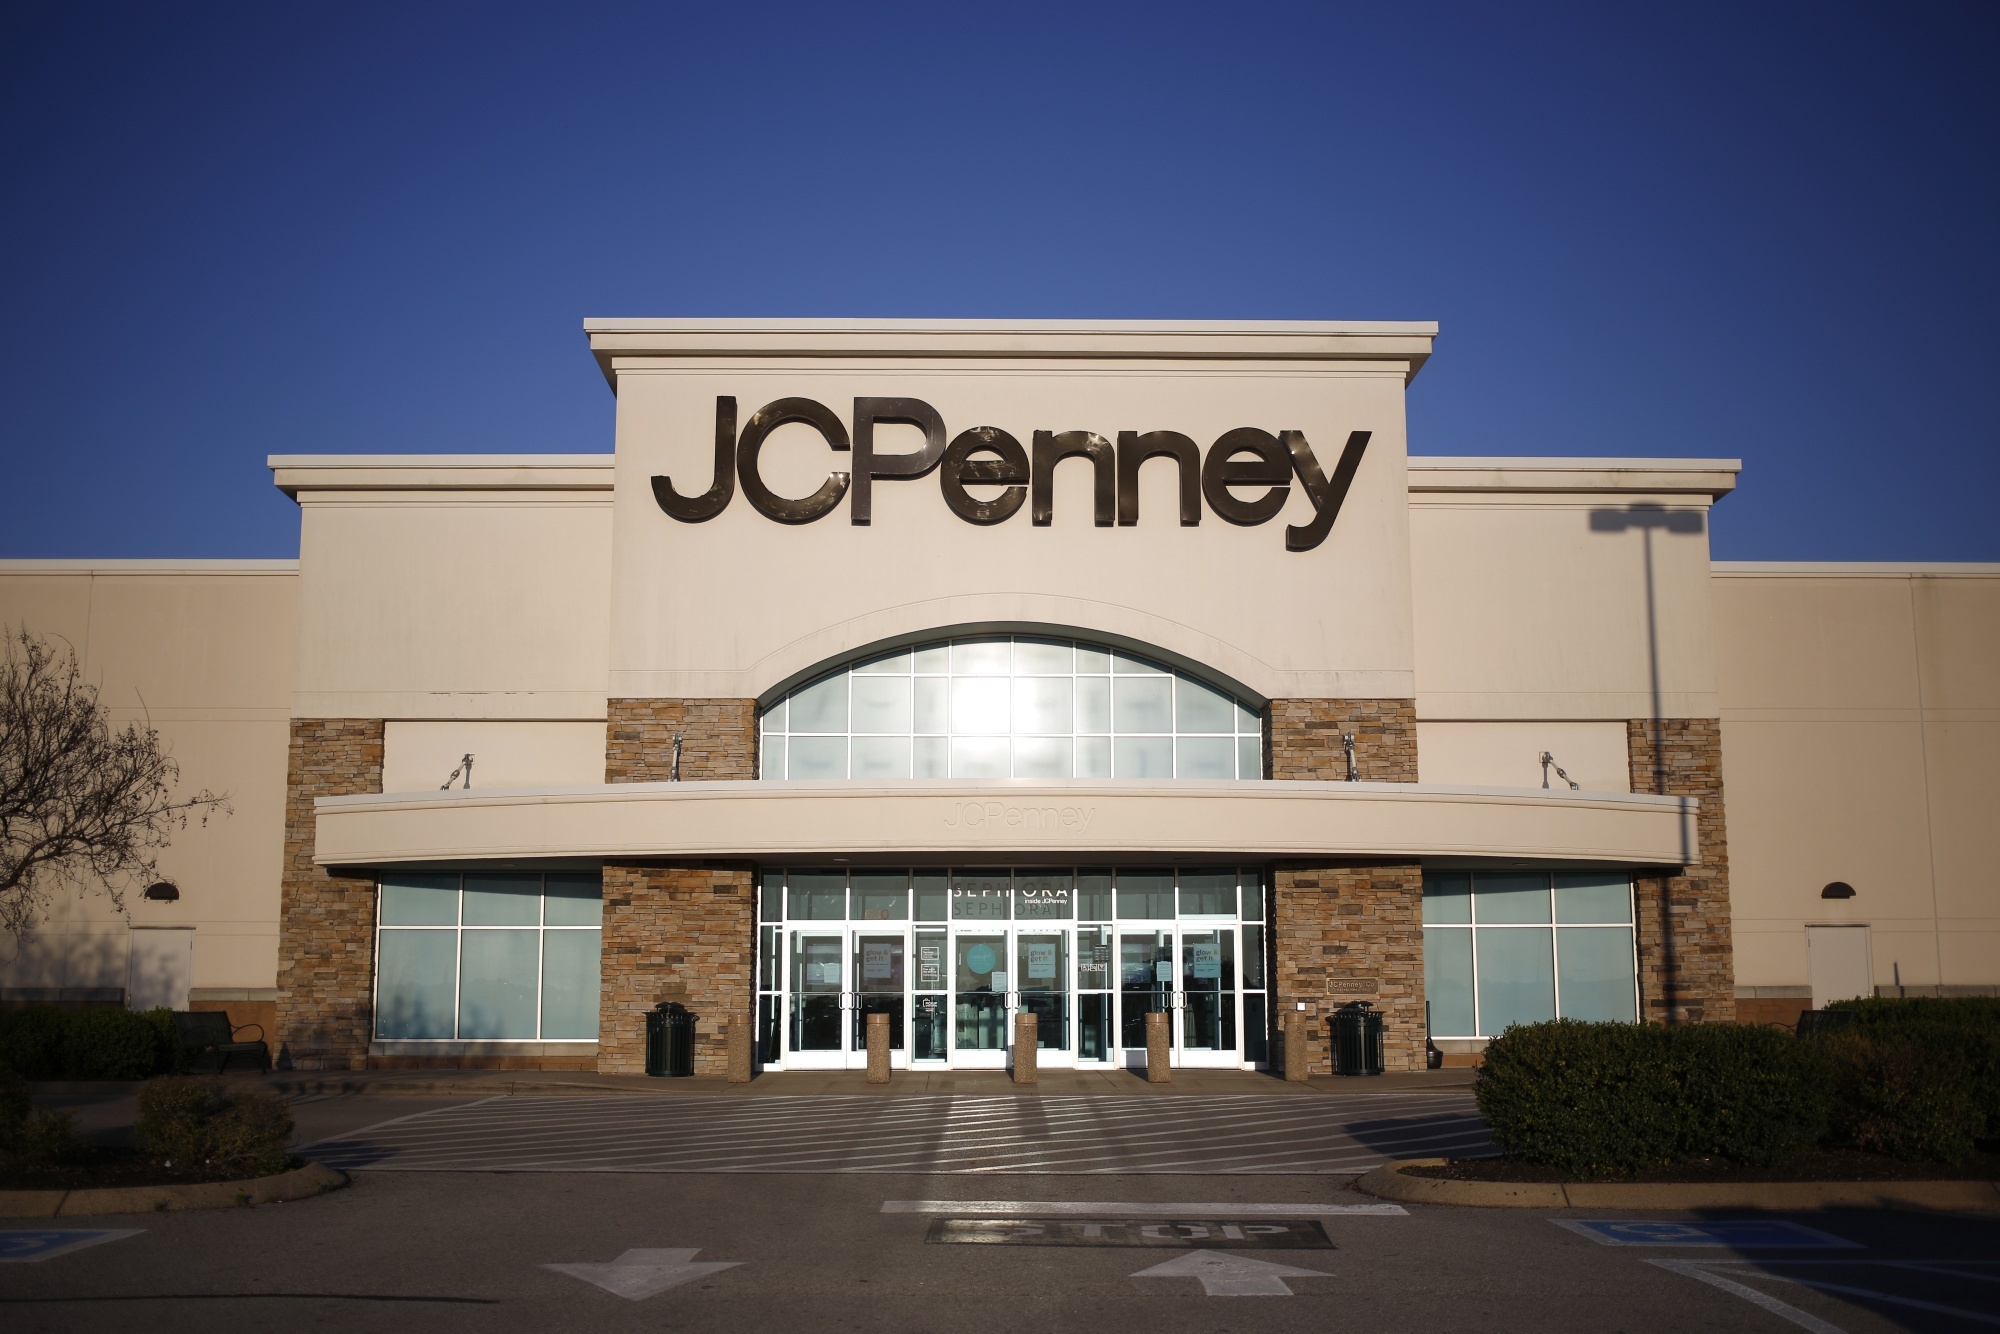 JCPenney Builds Momentum with Multiyear, Self-Funded $1 Billion